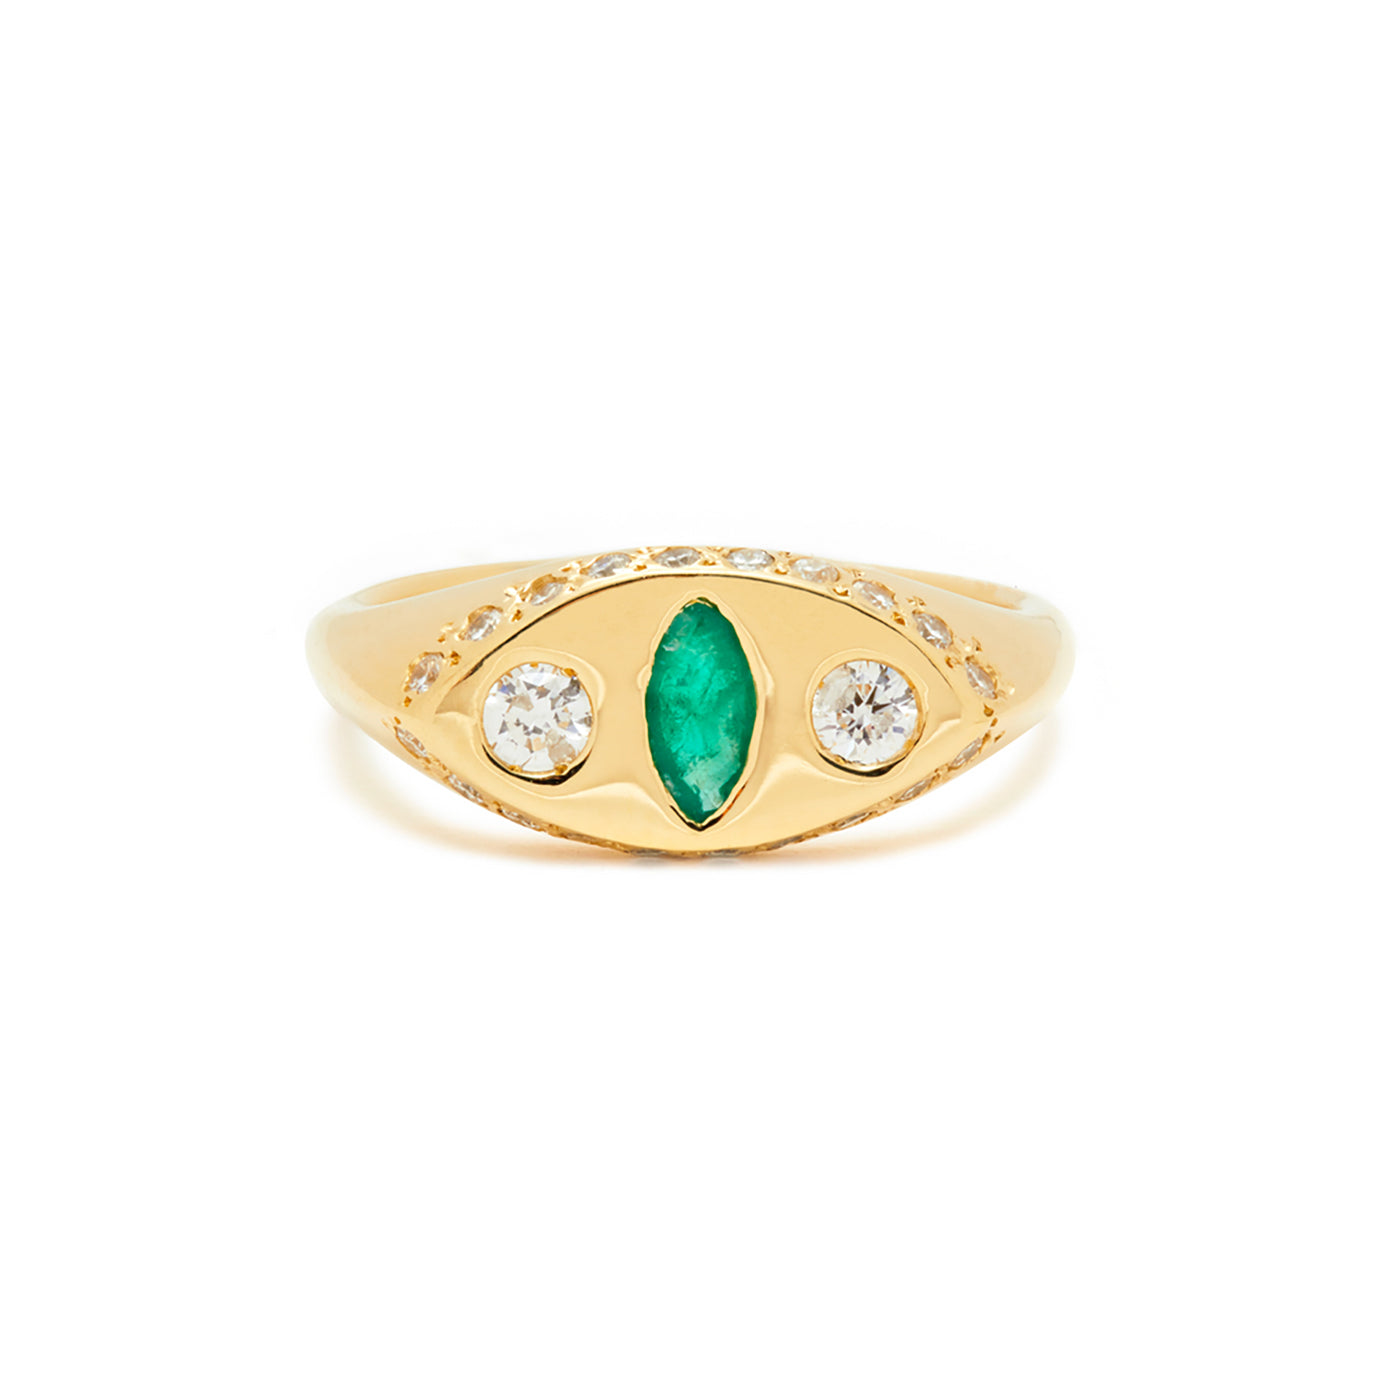 The Emerald Makeda Ring